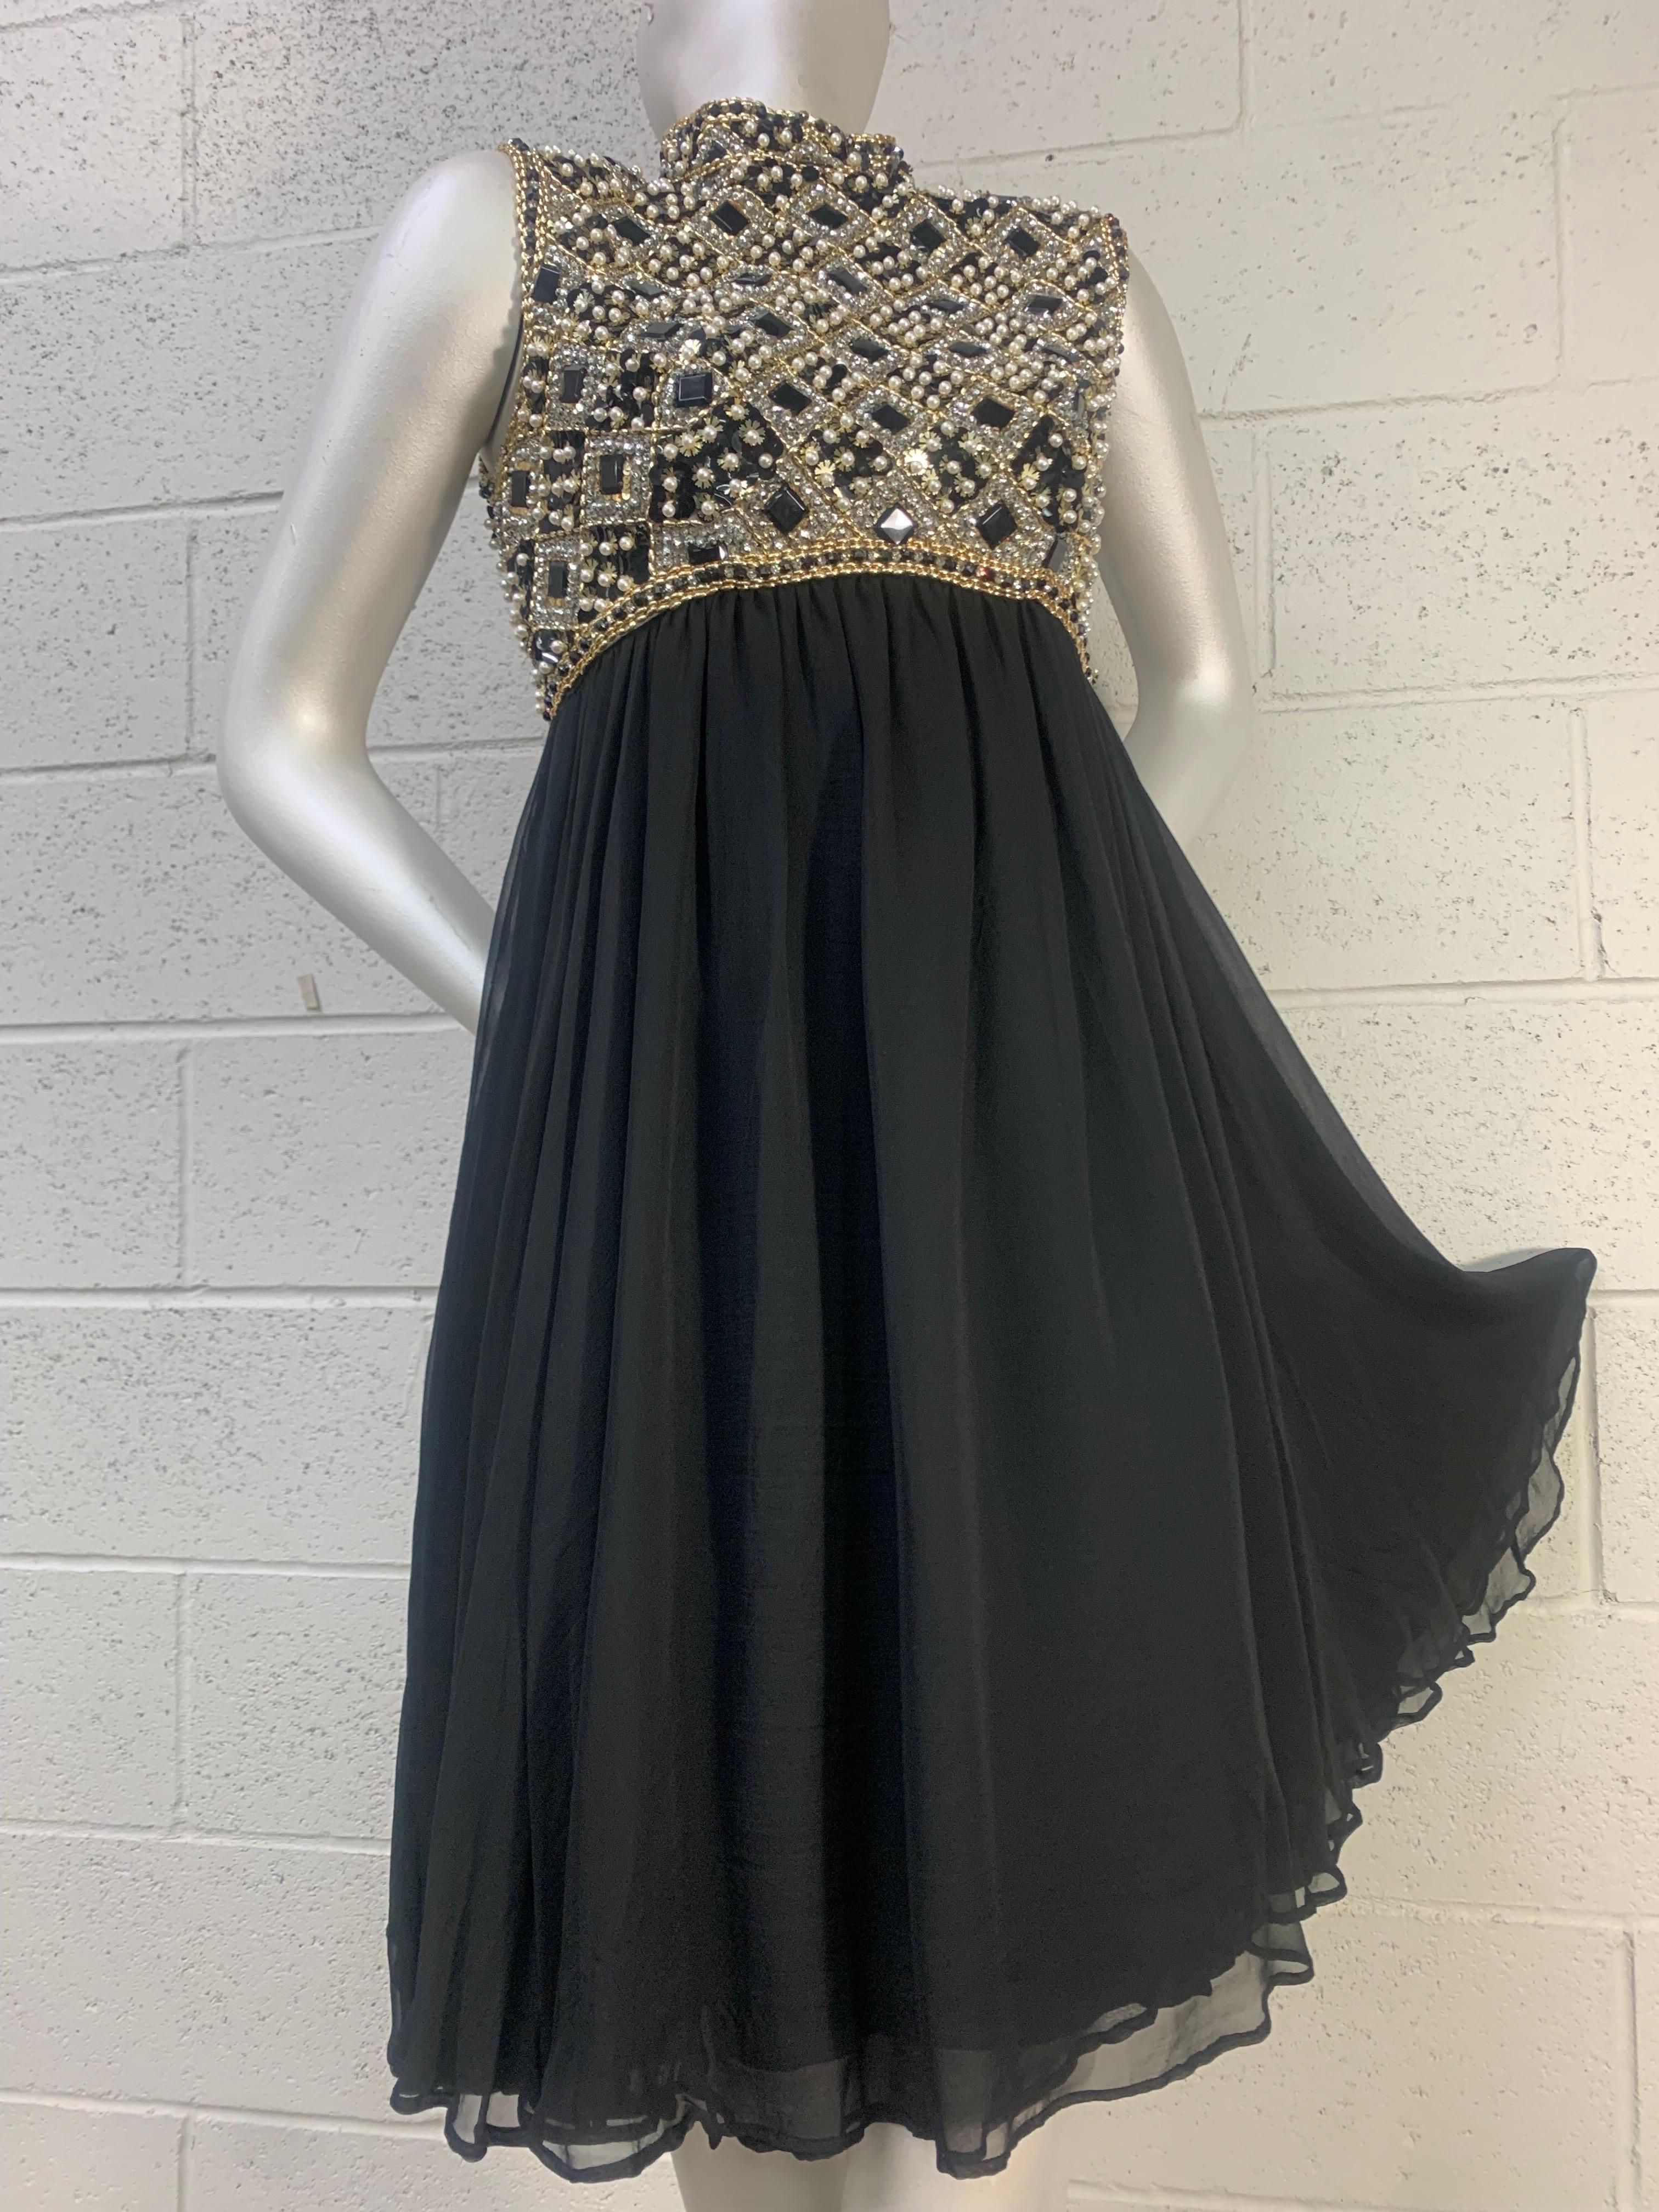 1960s Victoria Royale Ltd. Beaded Sequined Mod Cocktail Dress in Black:  Empire waistline. Bodice is heavily beaded with a banded neckline. Double layer silk chiffon full skirt. Center back zipper. Fully lined. US size up to a modern 8.